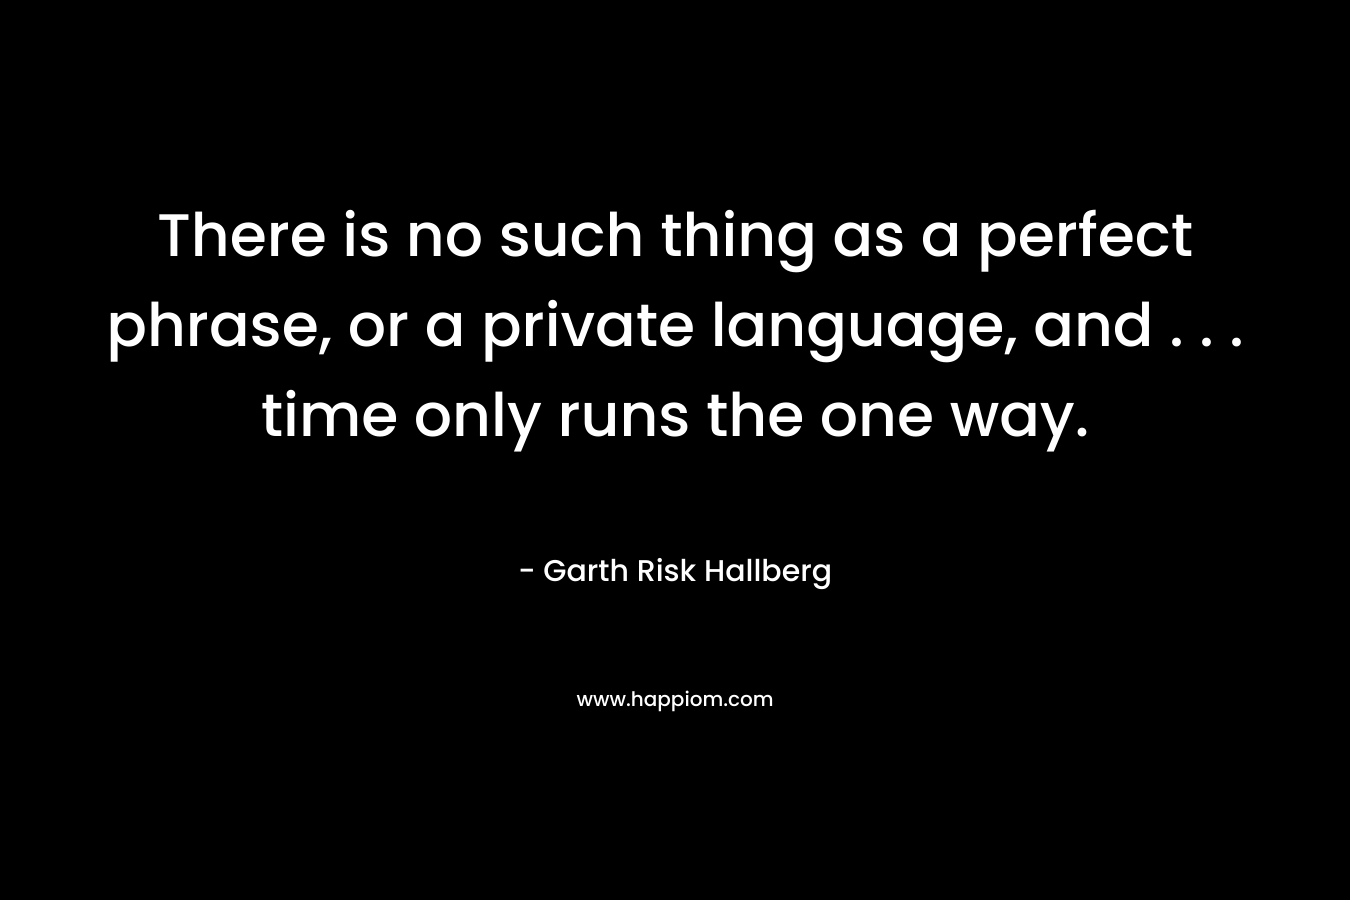 There is no such thing as a perfect phrase, or a private language, and . . . time only runs the one way.